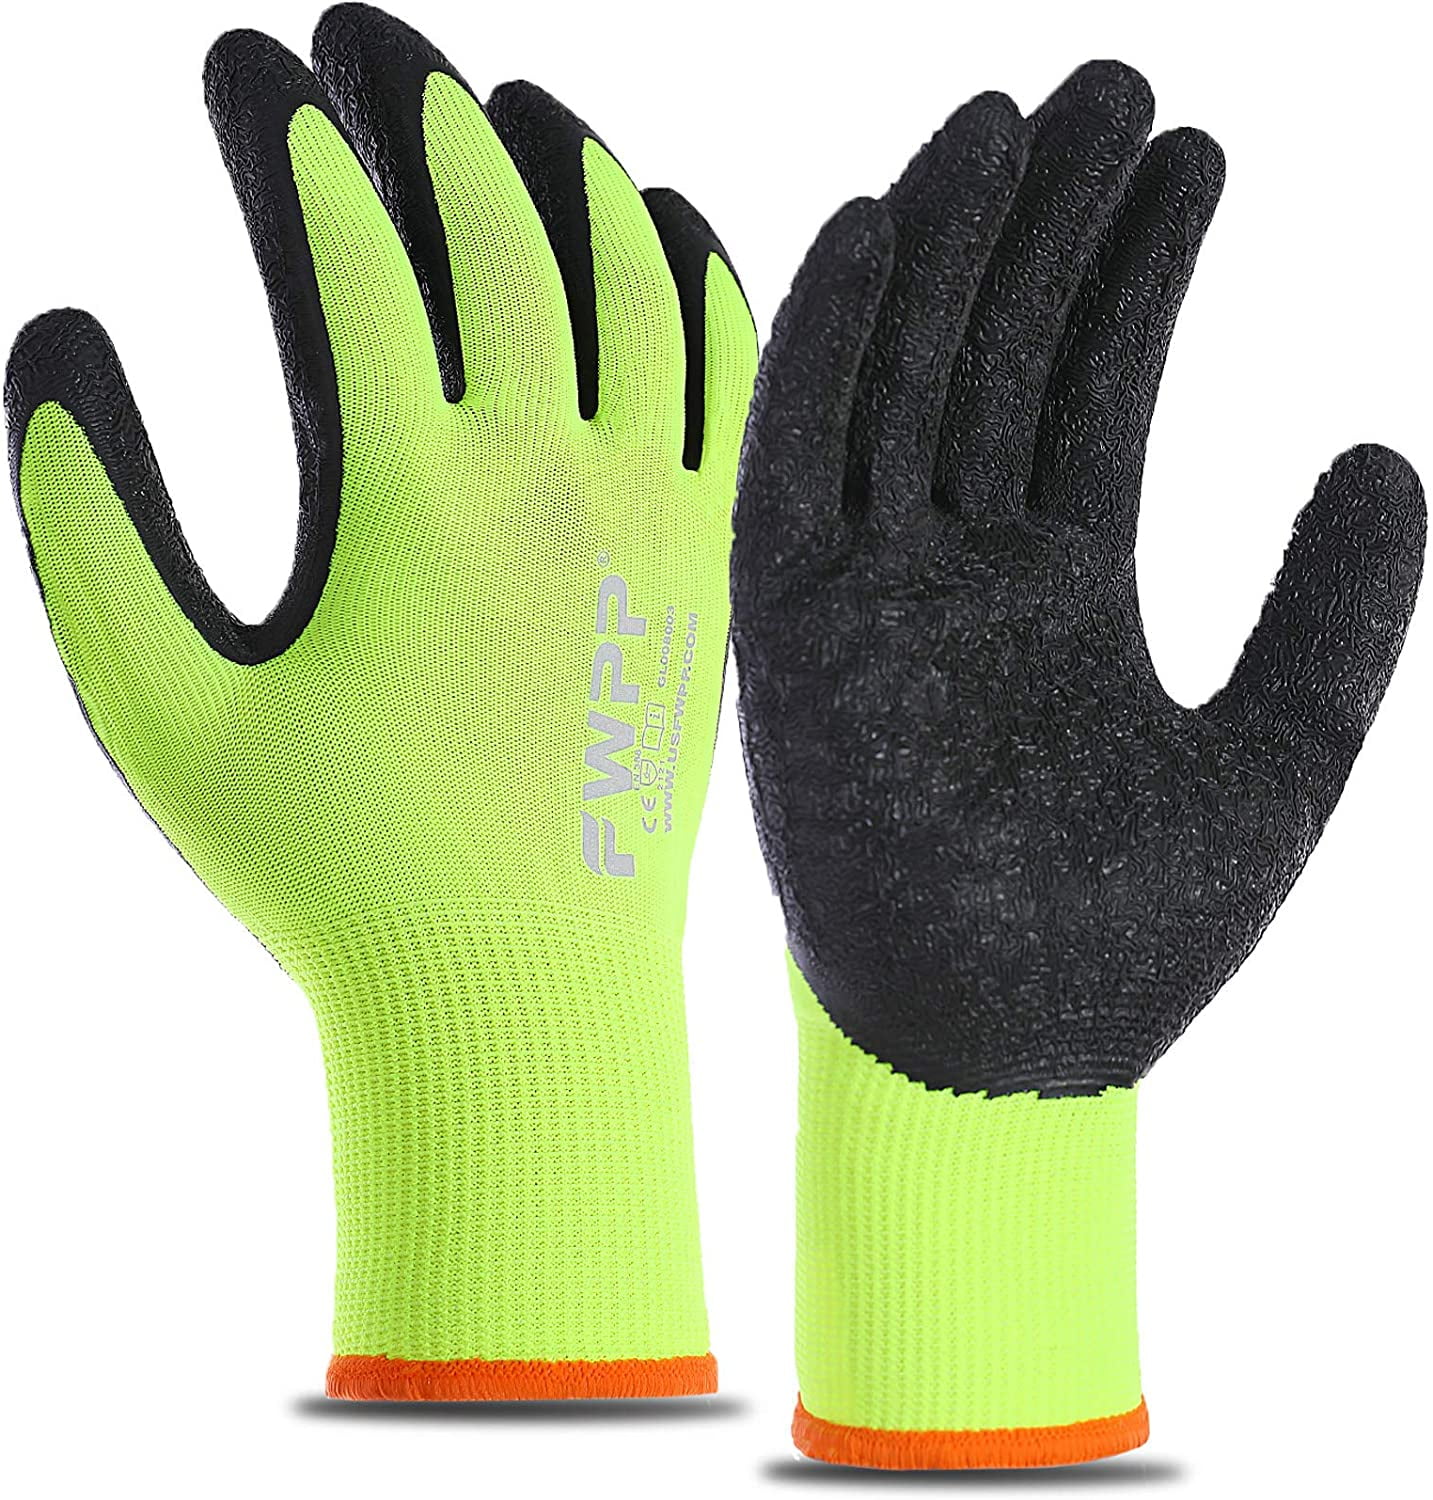 20 PAIRS LATEX COATED BUILDERS SAFETY GRIP WORK GLOVES MENS RUBBER GARDENING M/8 